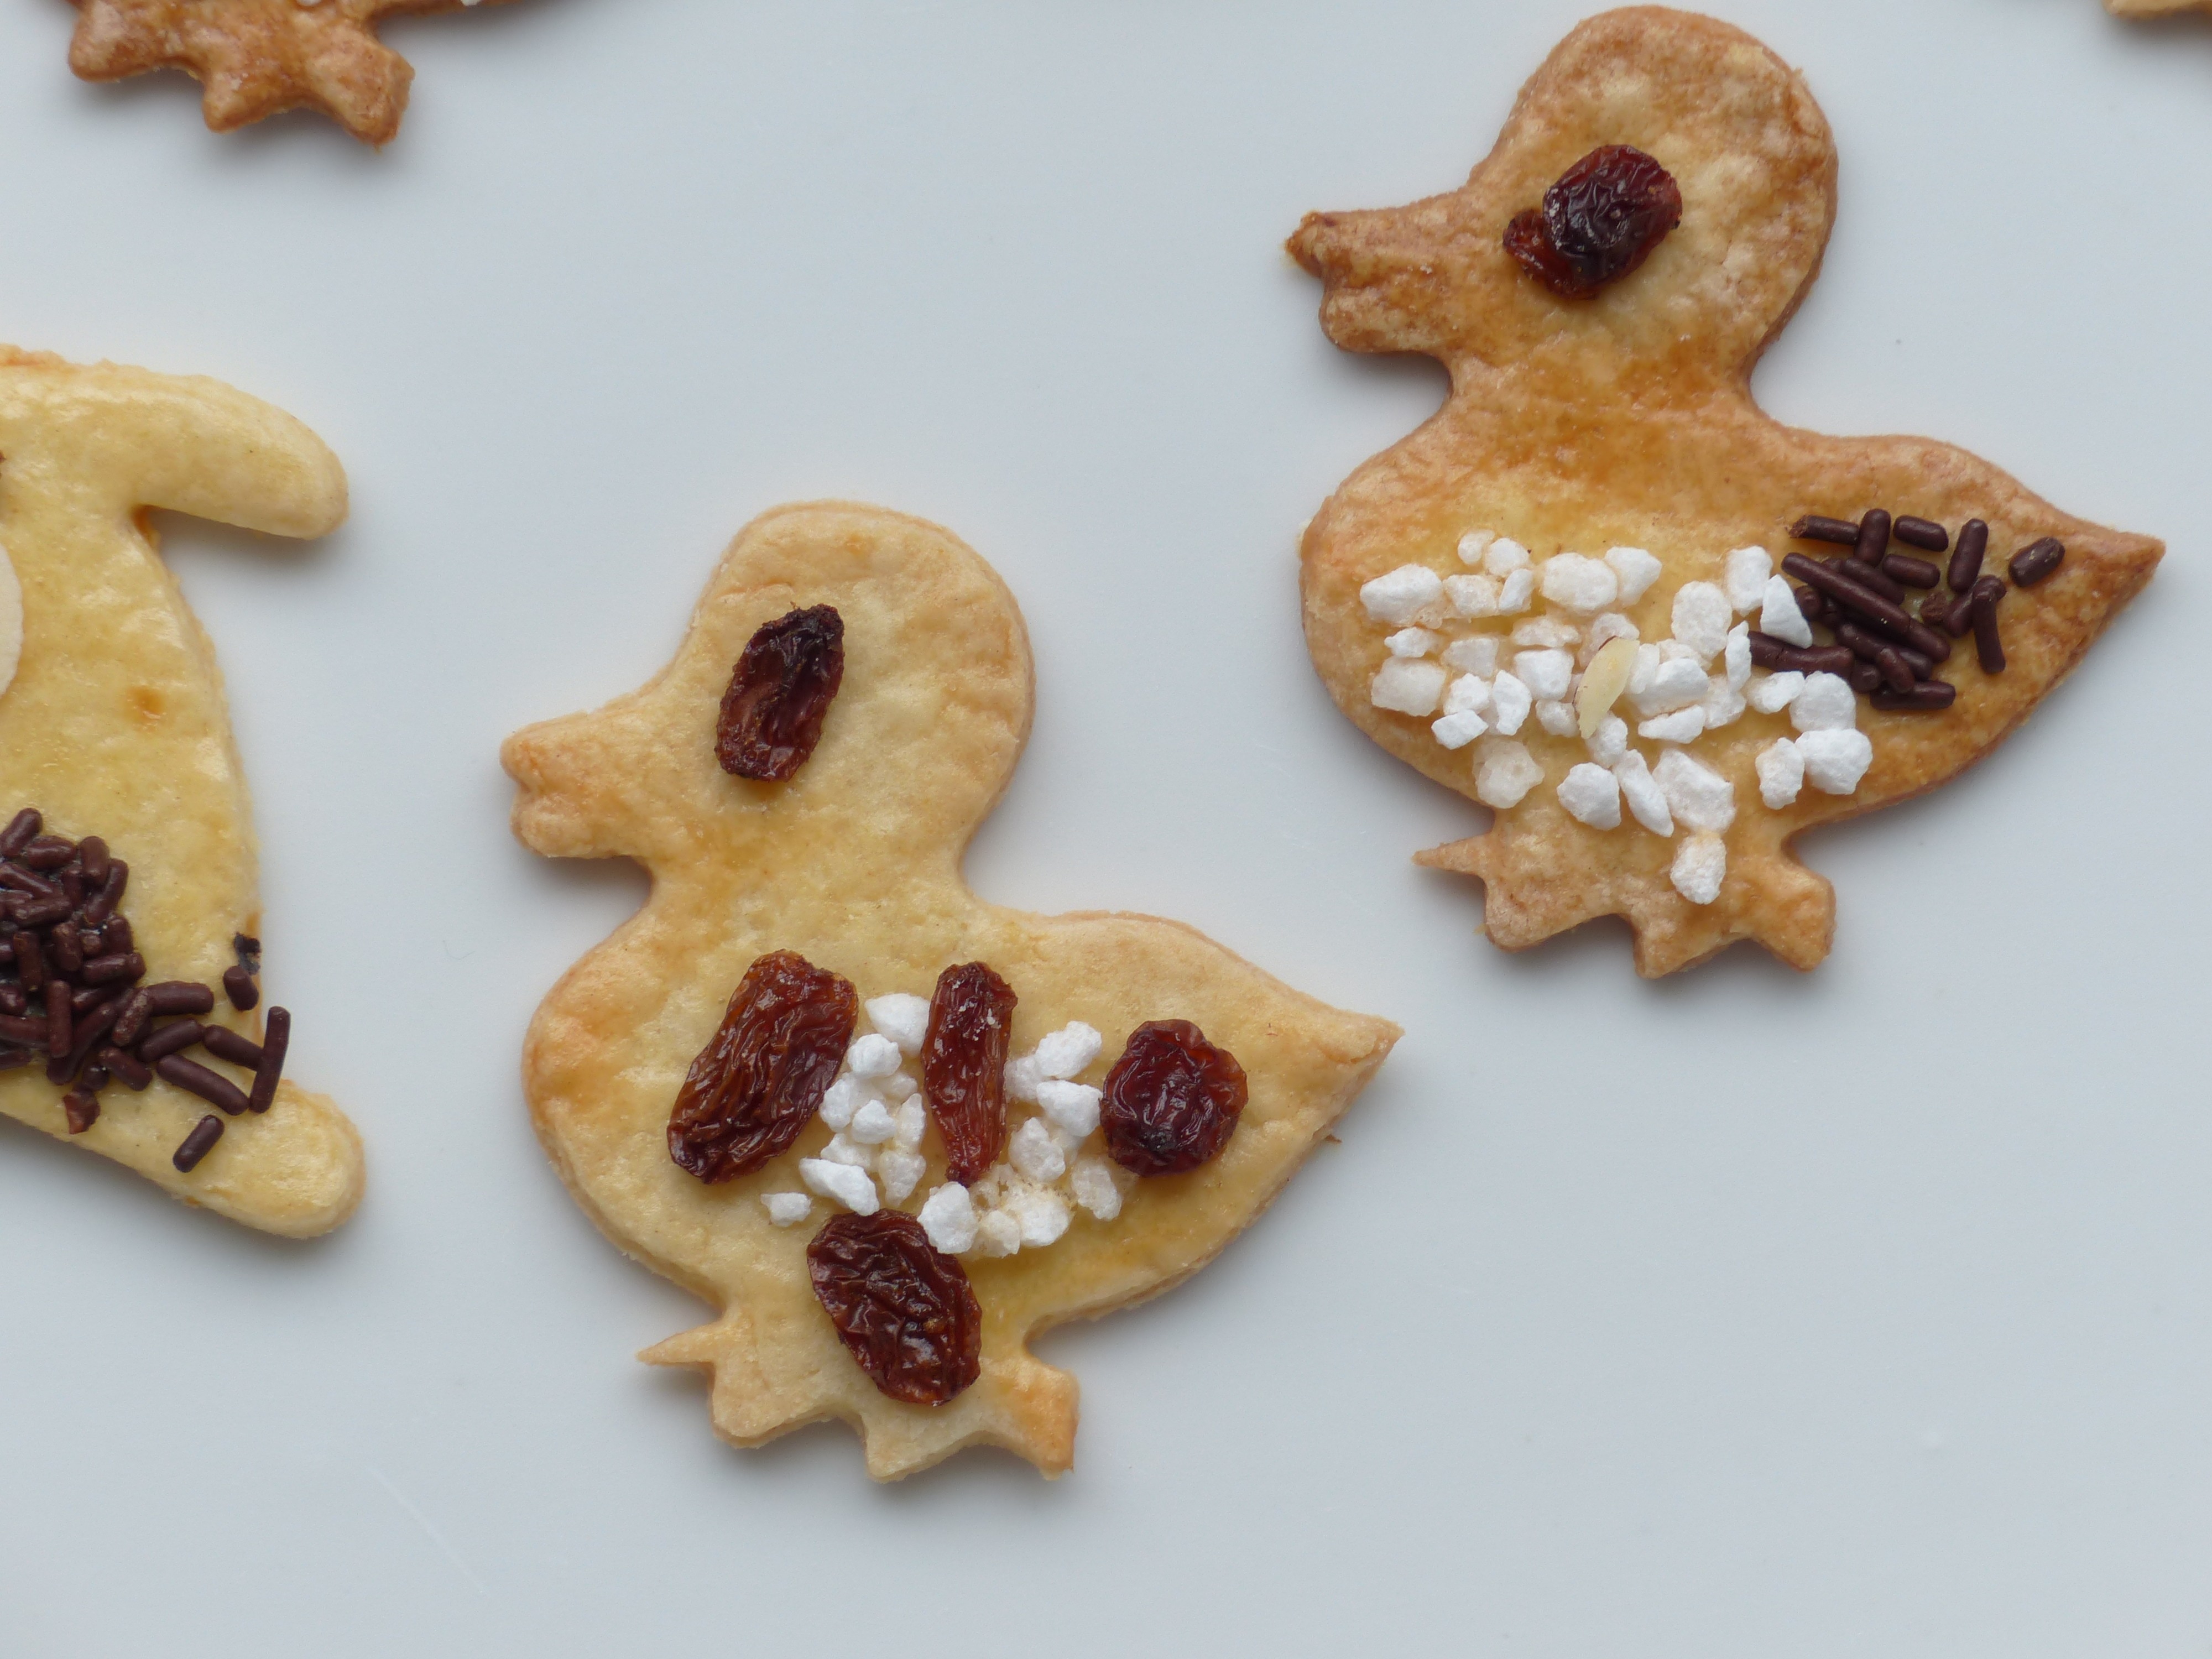 duck shaped cookie with raisins